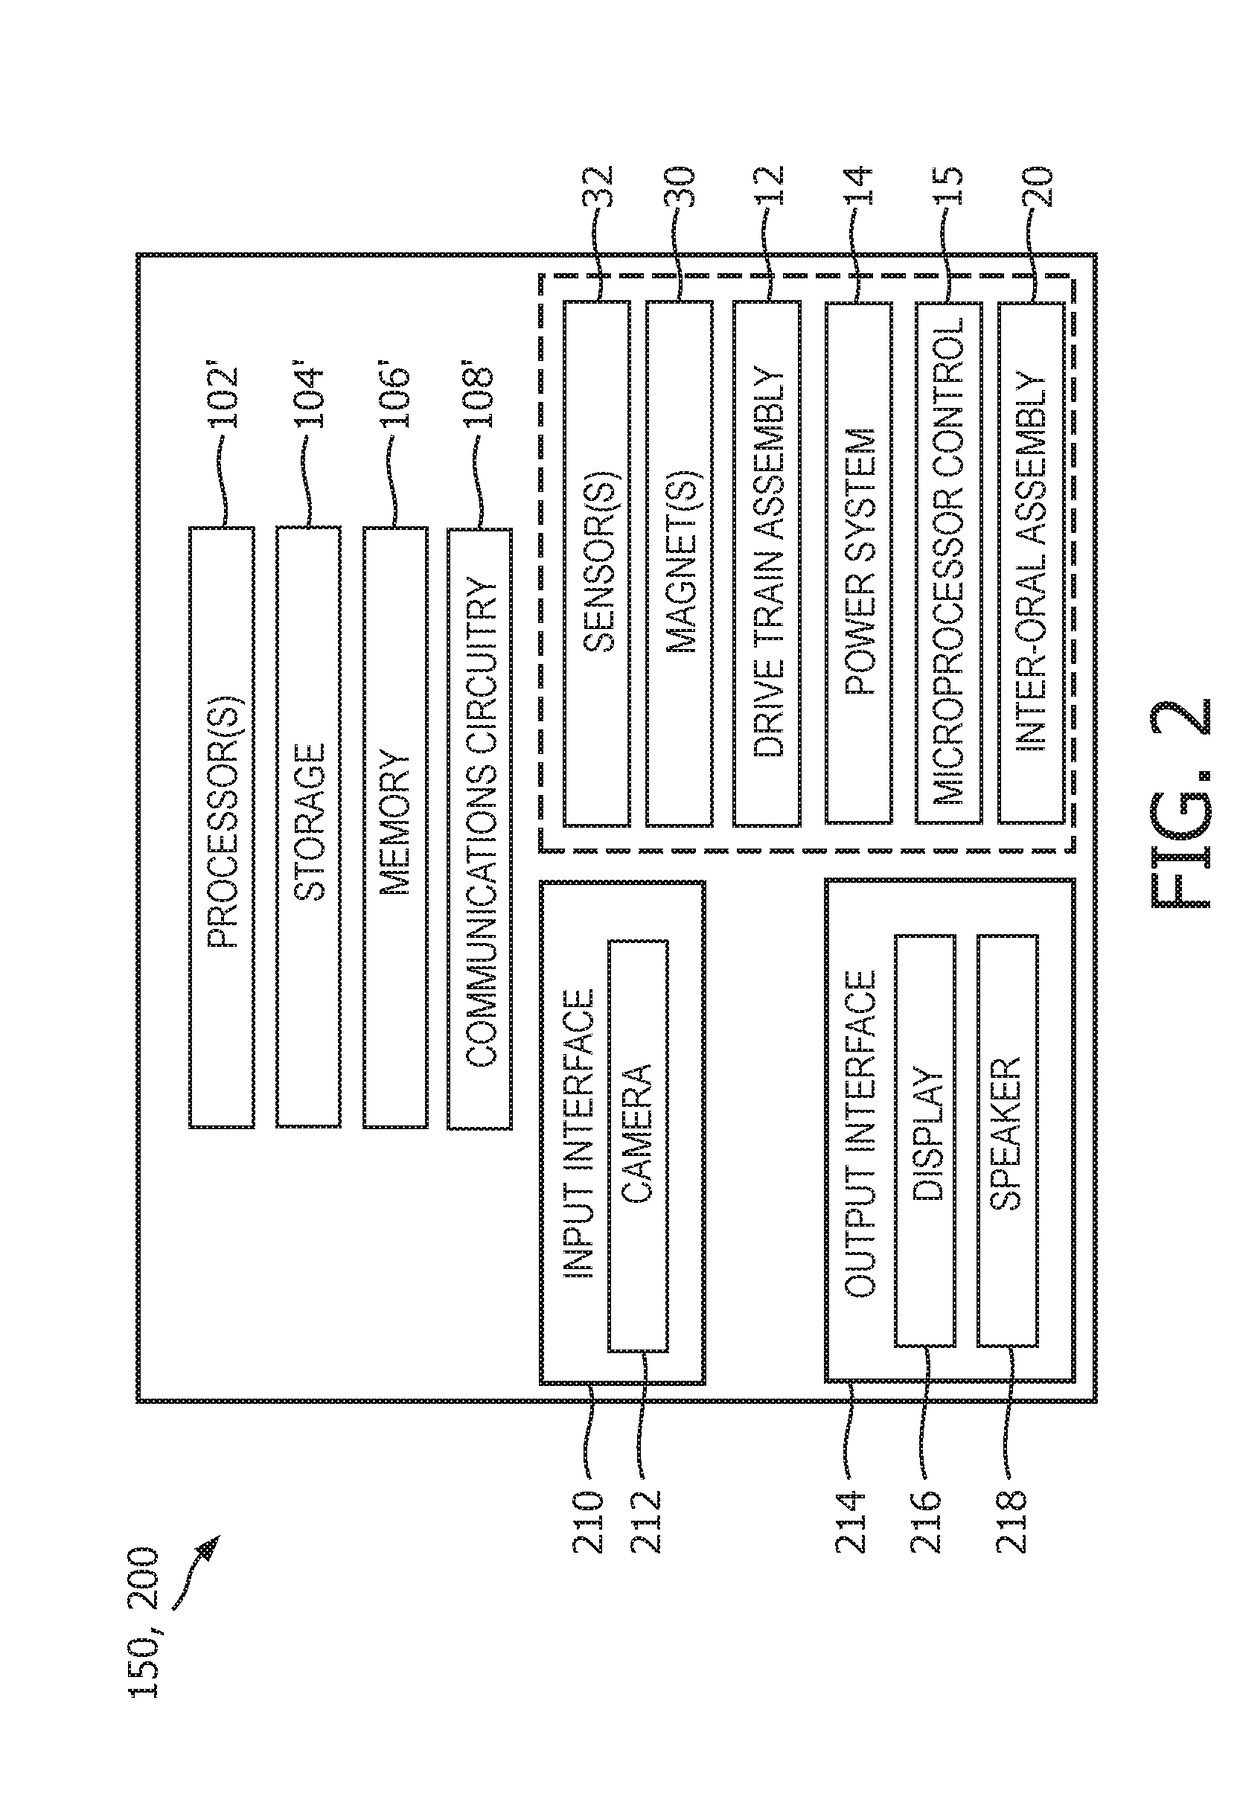 Systems, methods, and devices for providing guidance and feedback based on location and performance